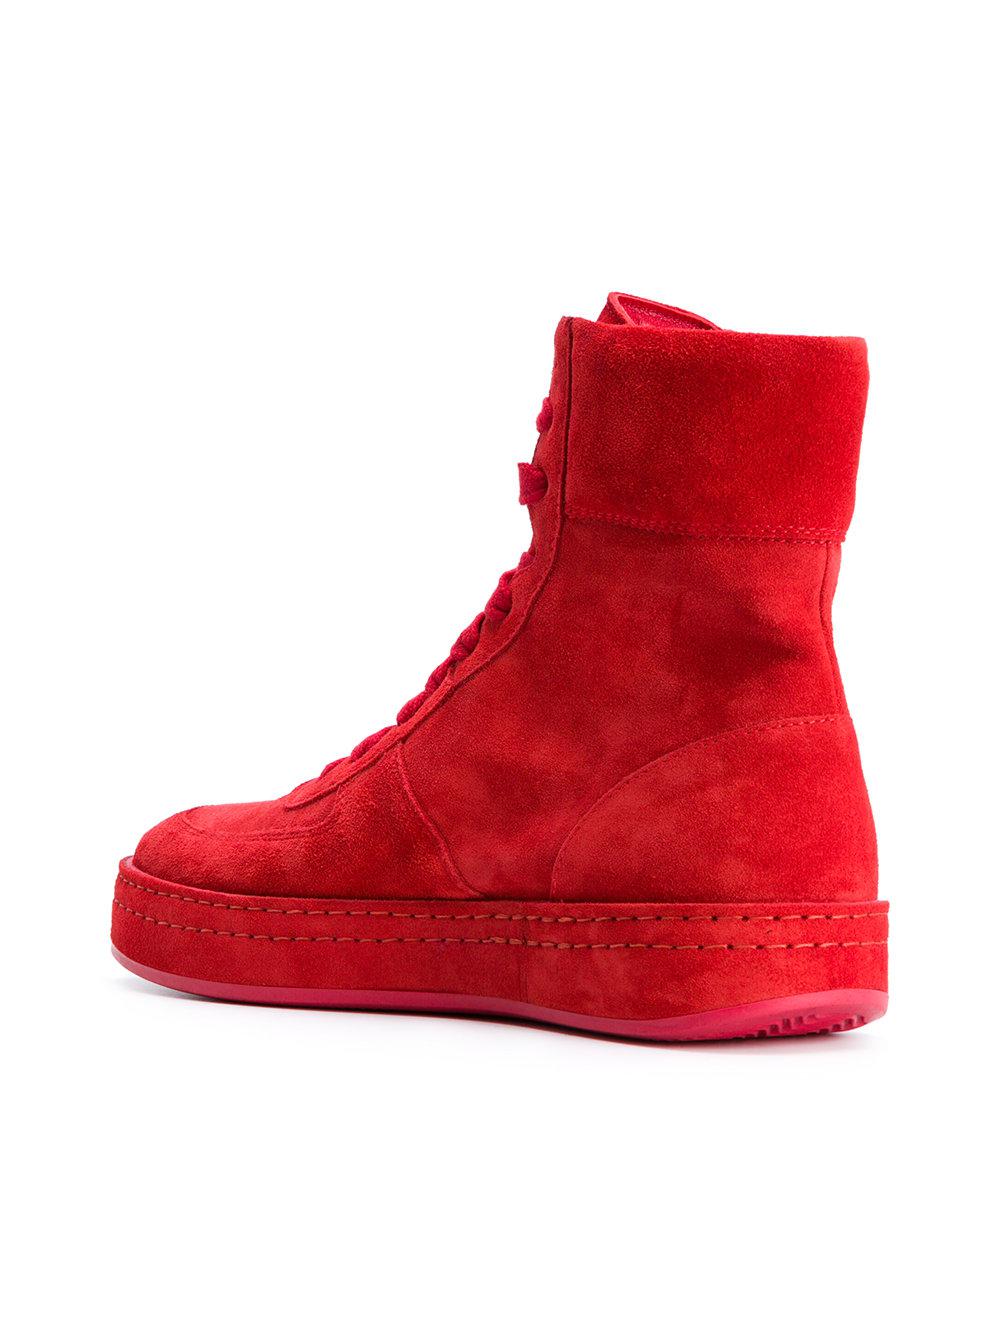 Lyst - Ann Demeulemeester Hi-top Lace Up Sneakers in Red